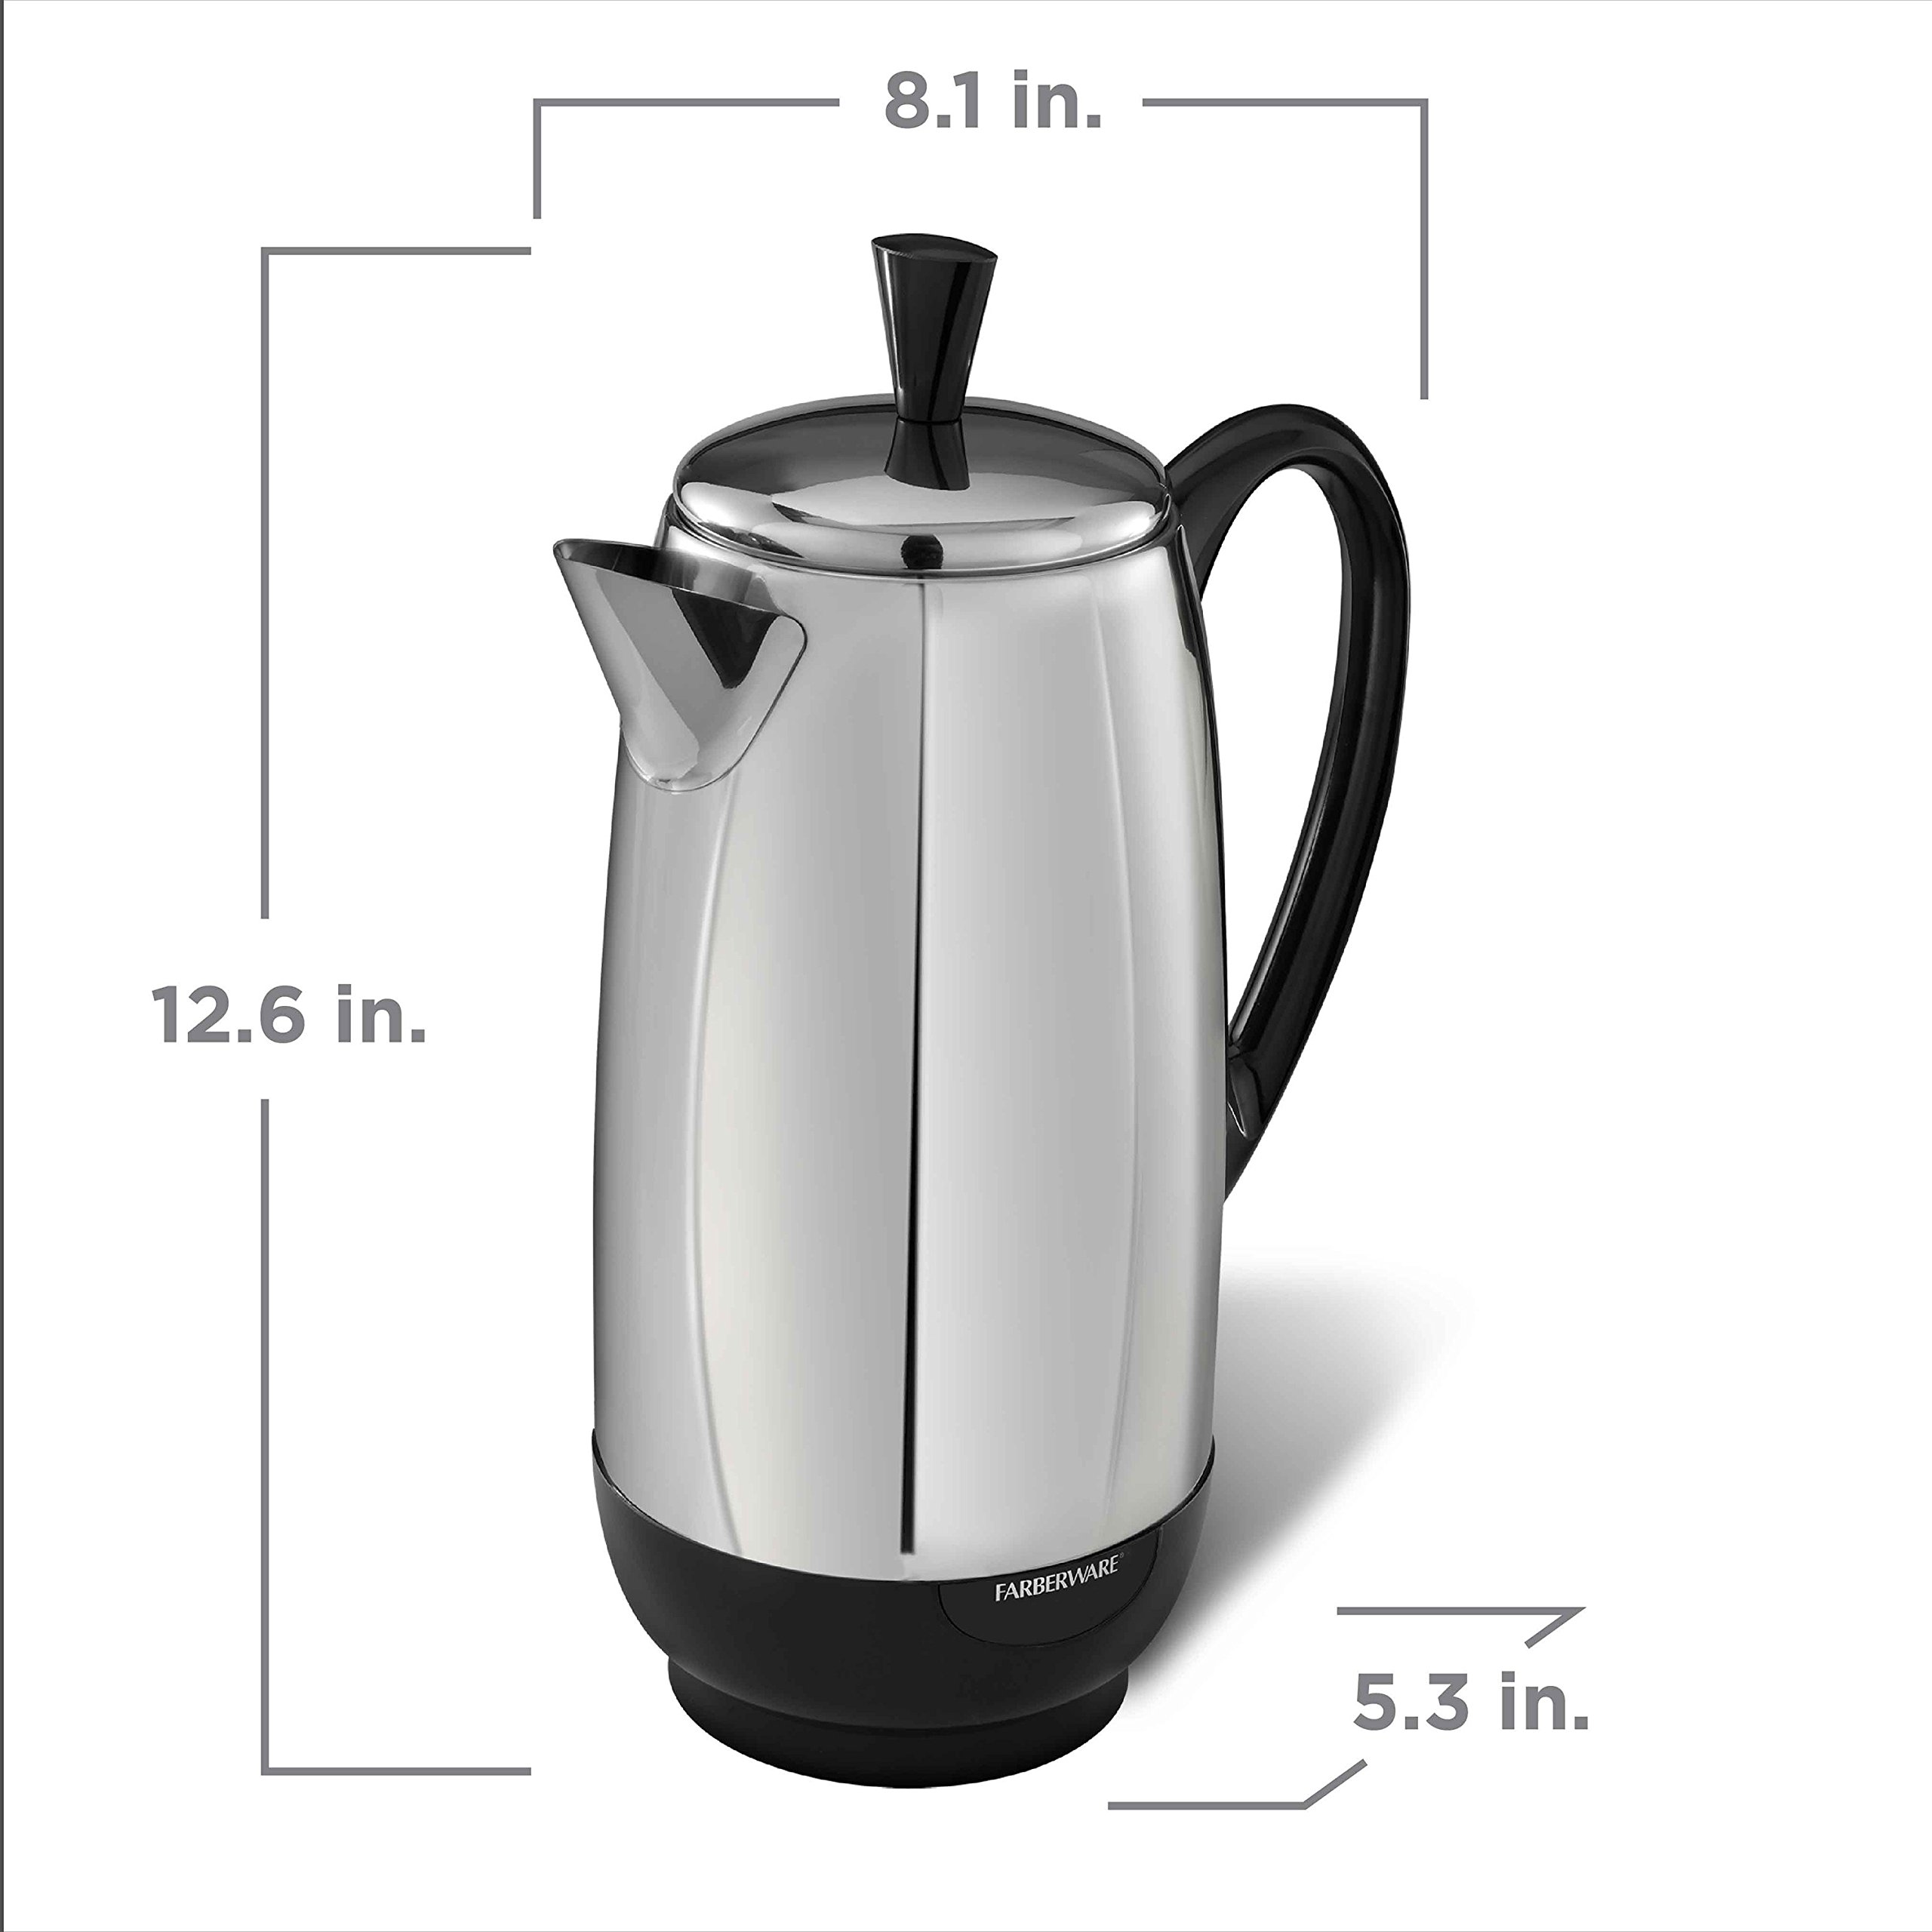 Farberware 12-Cup Percolator, Stainless Steel, FCP412, 12-Cup, Black/Silver